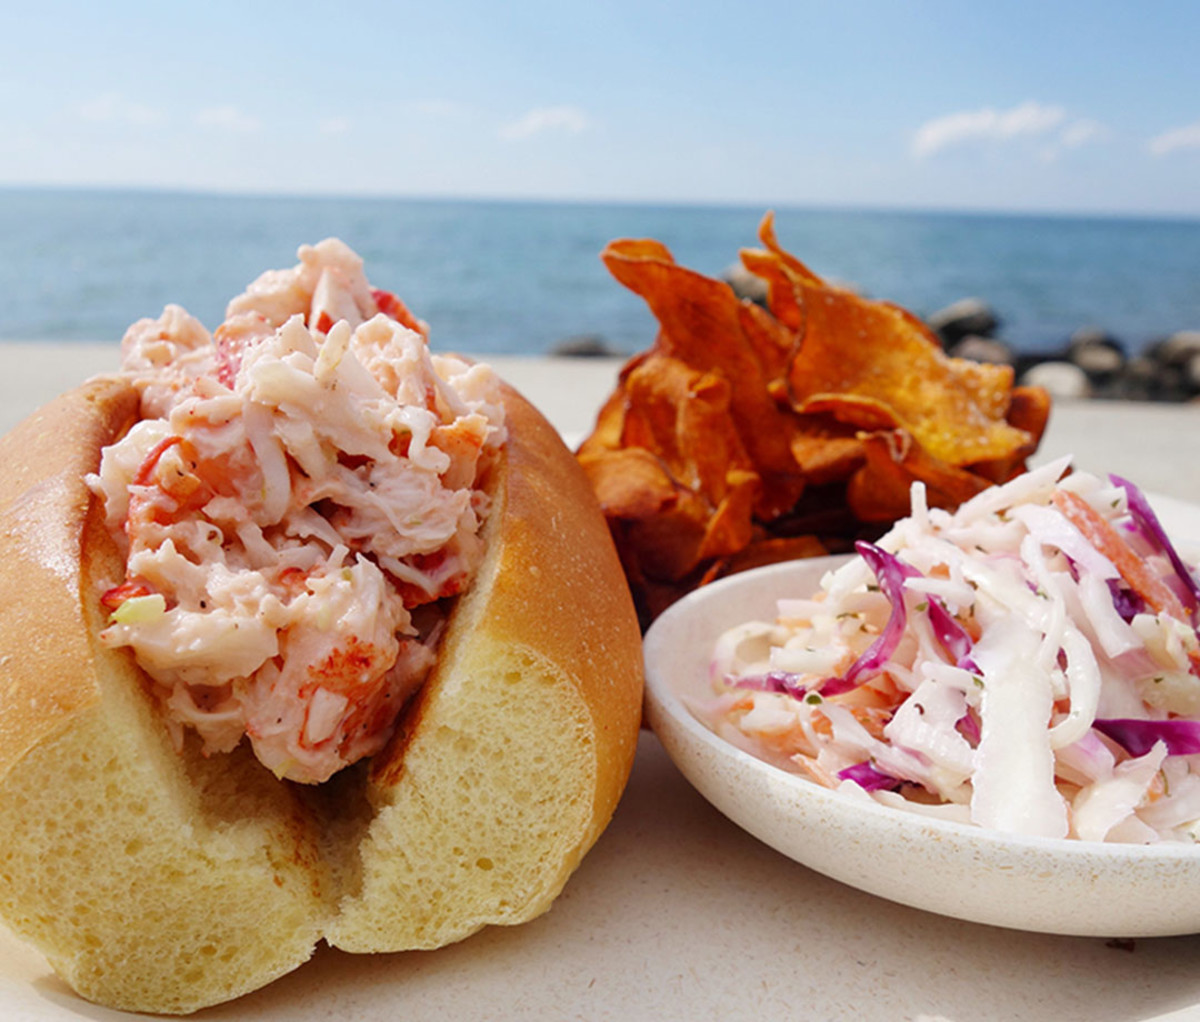 A lobster roll, slaw, and chips from Duryea Lobster Deck in Montauk, NY